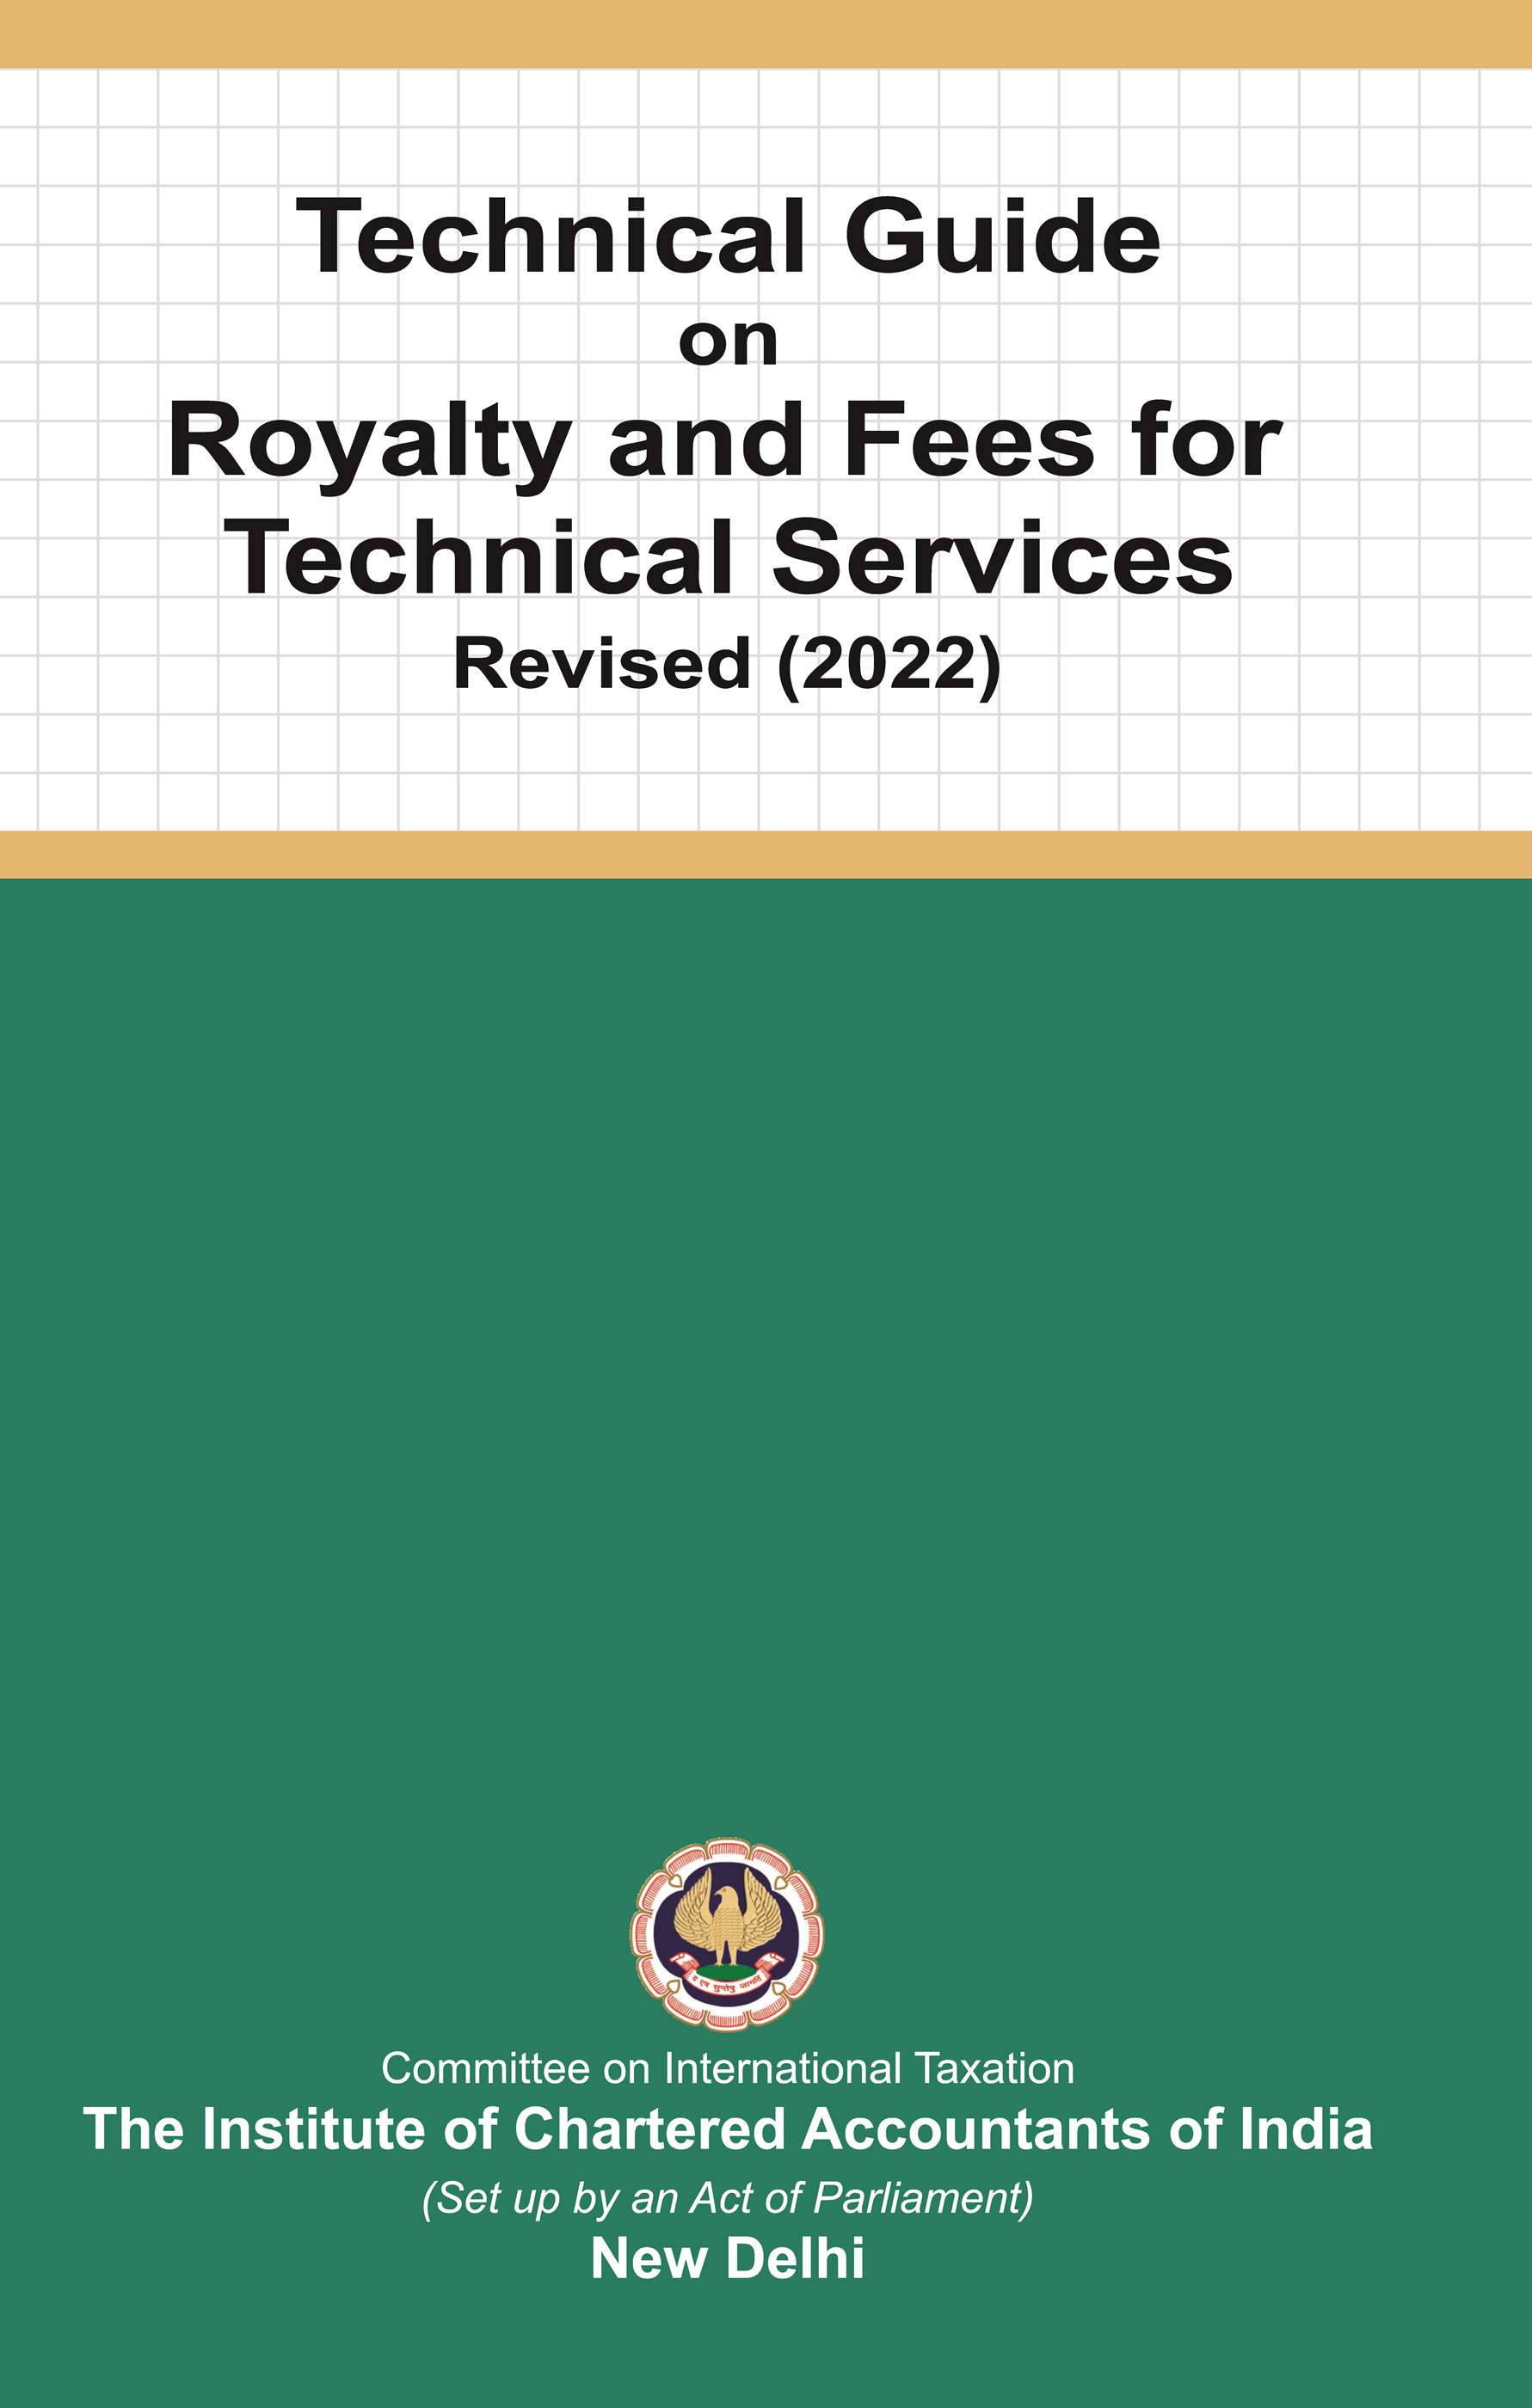 Technical Guide on Royalty and Fees for Technical Services, 2022 (Revised)